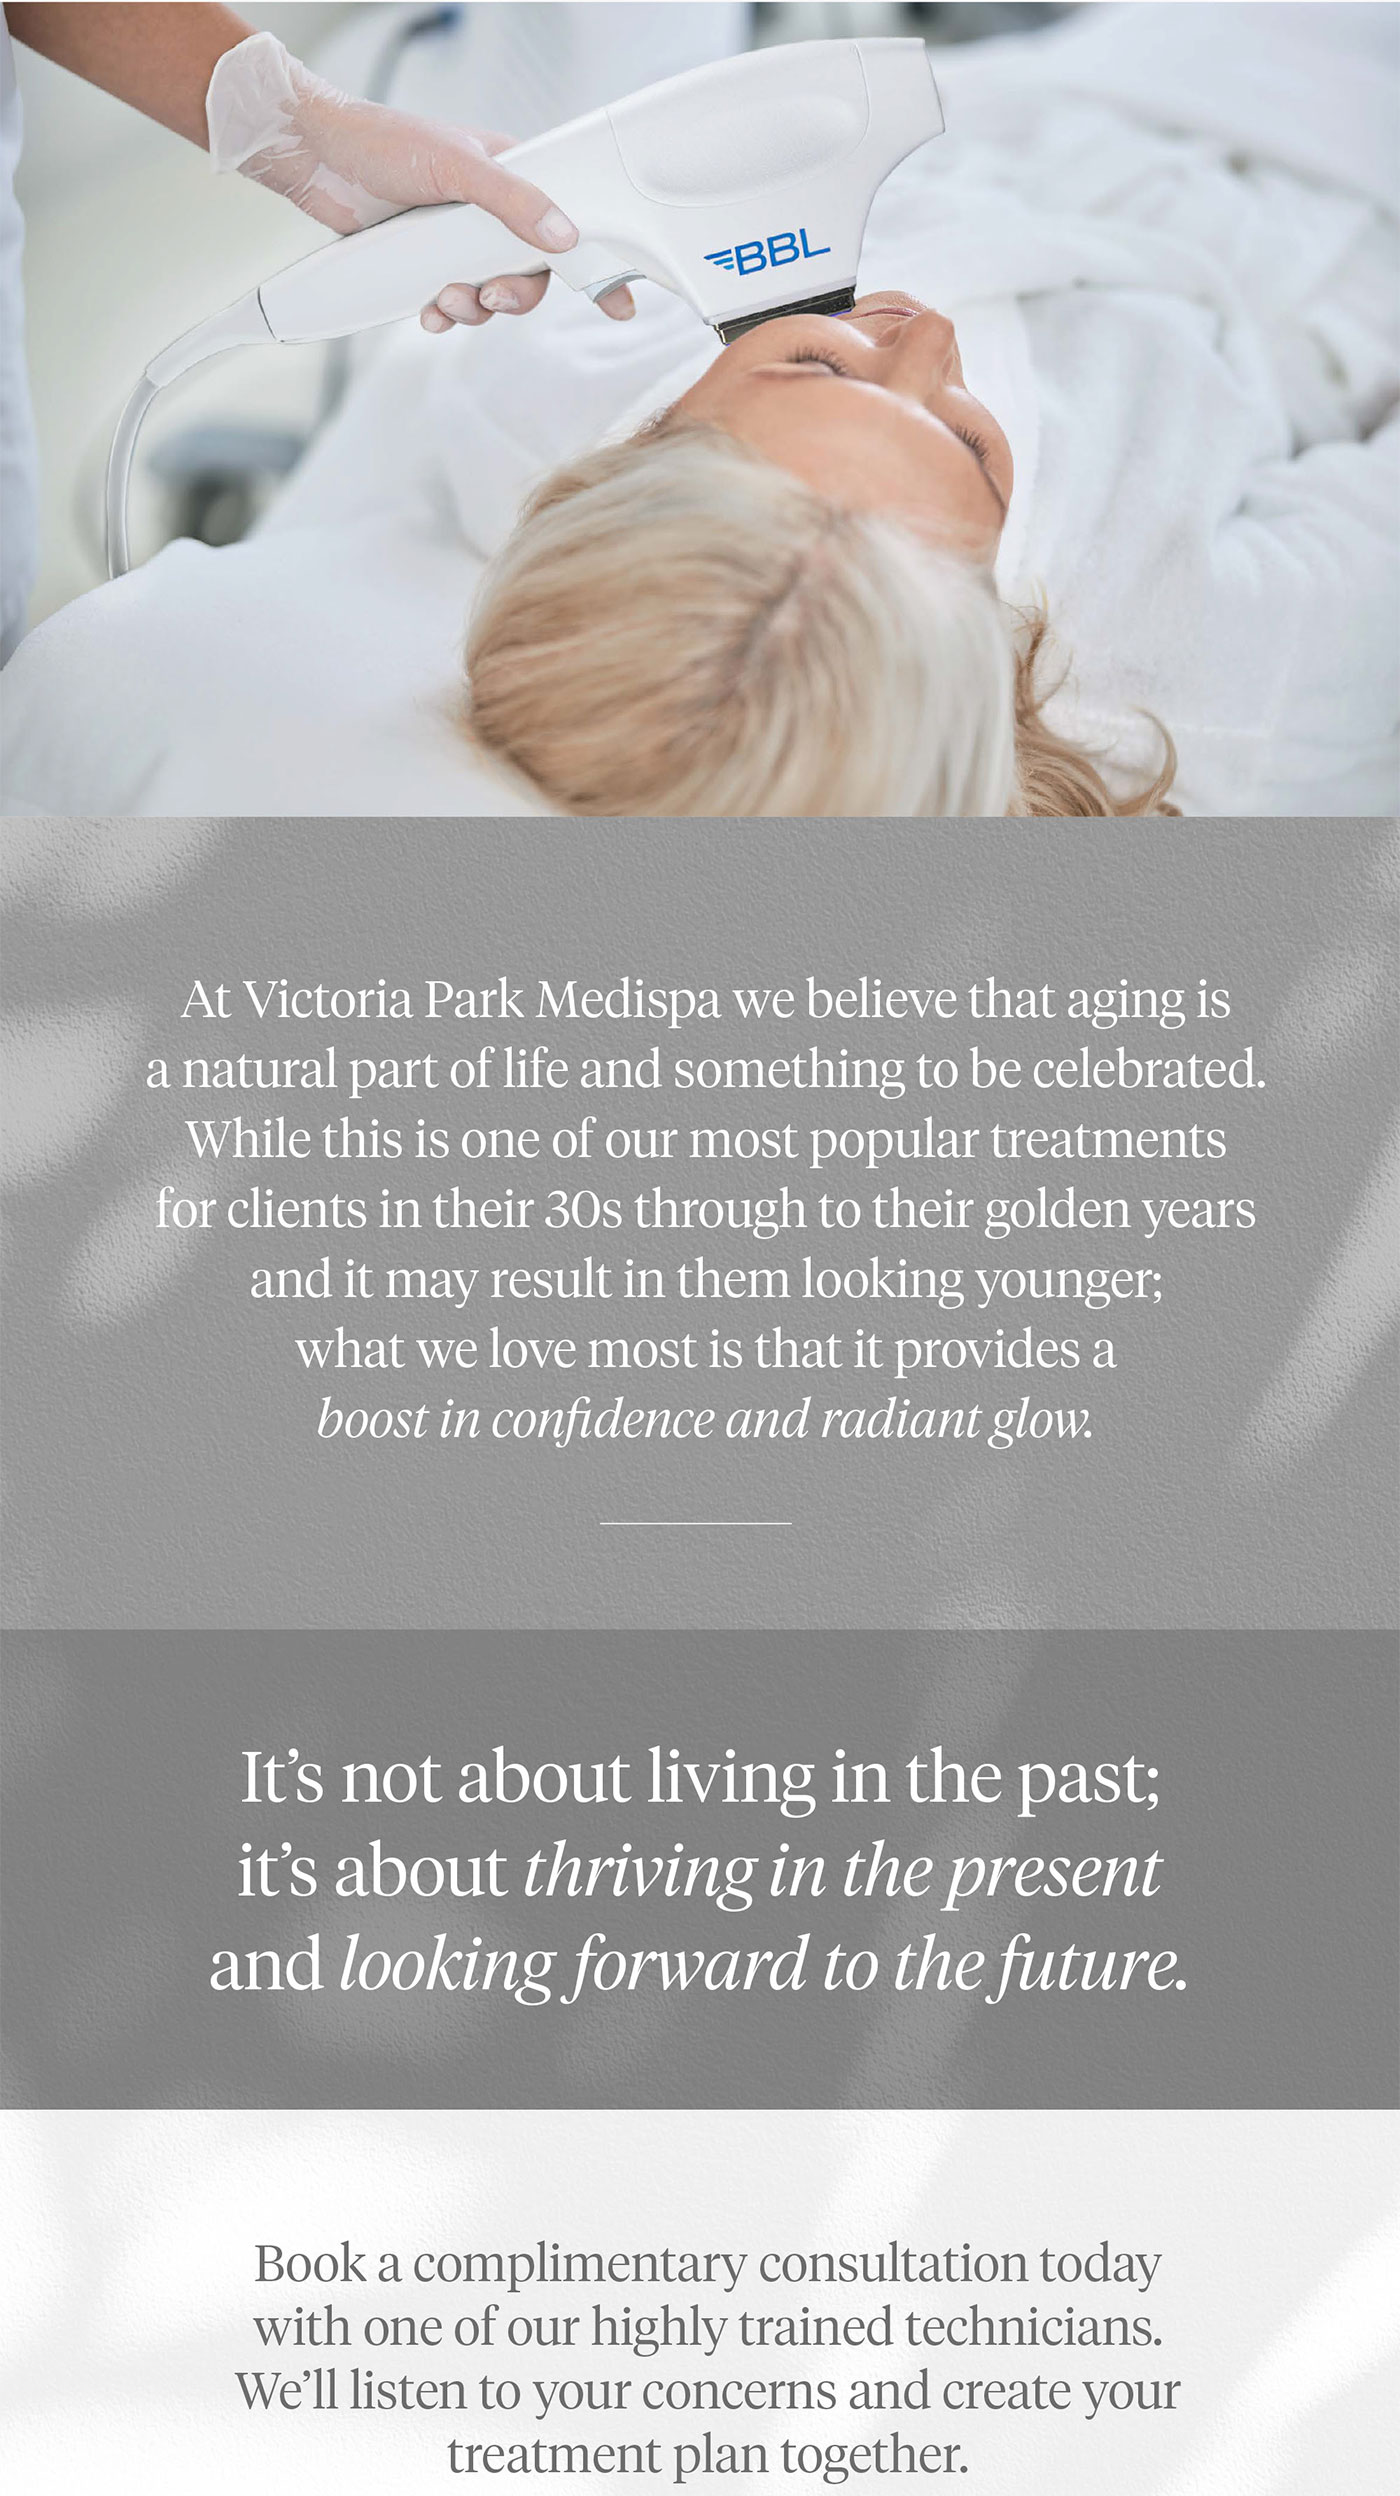 At Victoria Park Medispa we believe that aging is a natural part of life and something to be celebrated. While this is one of our most popular treatments for clients in their 30s through to their golden years and it may result in them looking younger; what we love most is that it provides a boost in confidence and radiant glow. It's not about living in the past; it's about thriving in the present and looking forward to the future. Book a complimentary consultation today with one of our highly trained technicians. We'll listen to your concerns and create your treatment plan together.